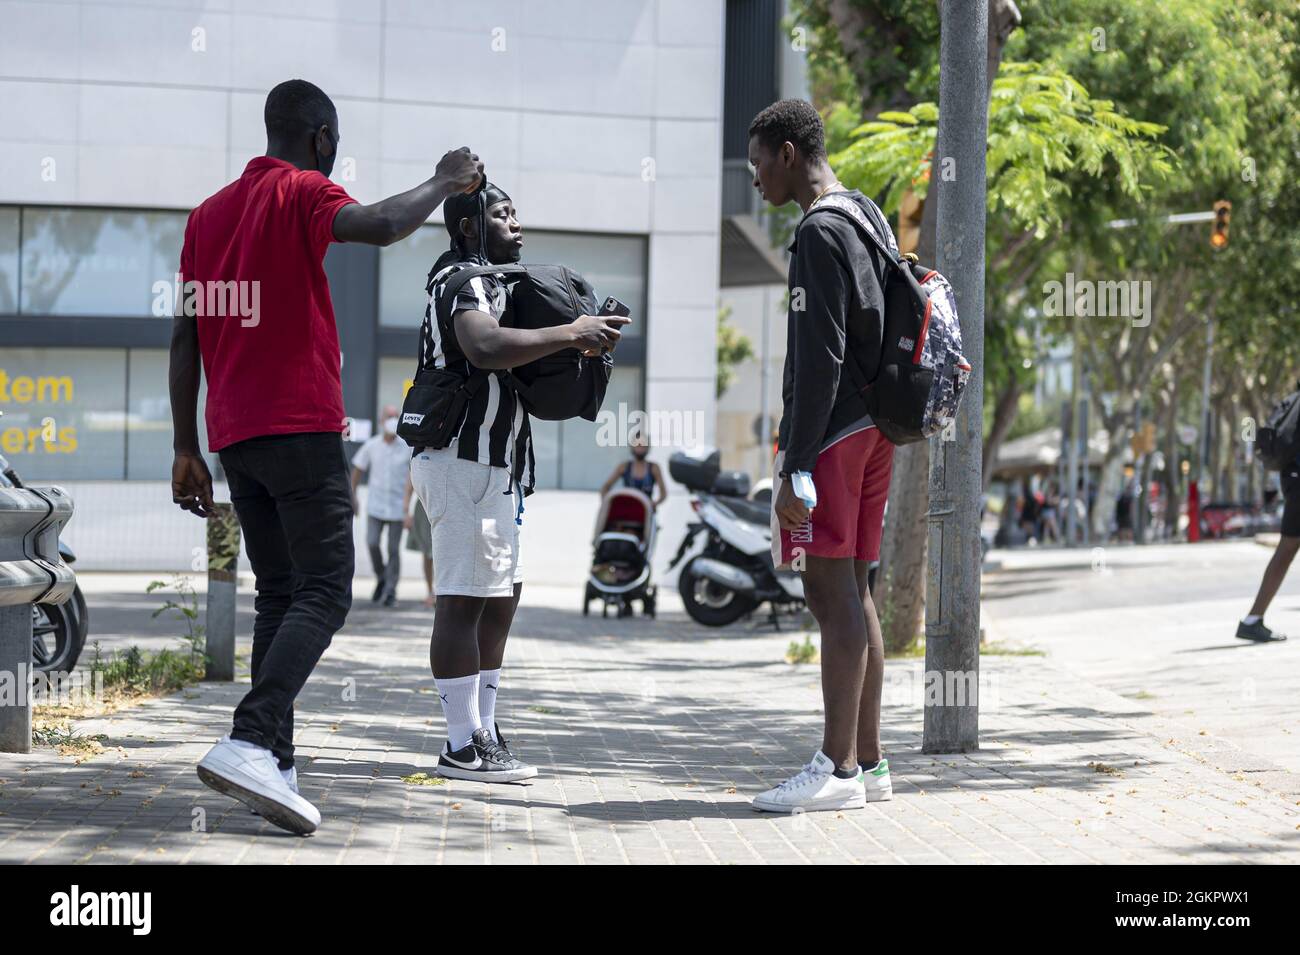 BARCELONA, SPAIN - Aug 25, 2021: A group of young black men on the city street Stock Photo